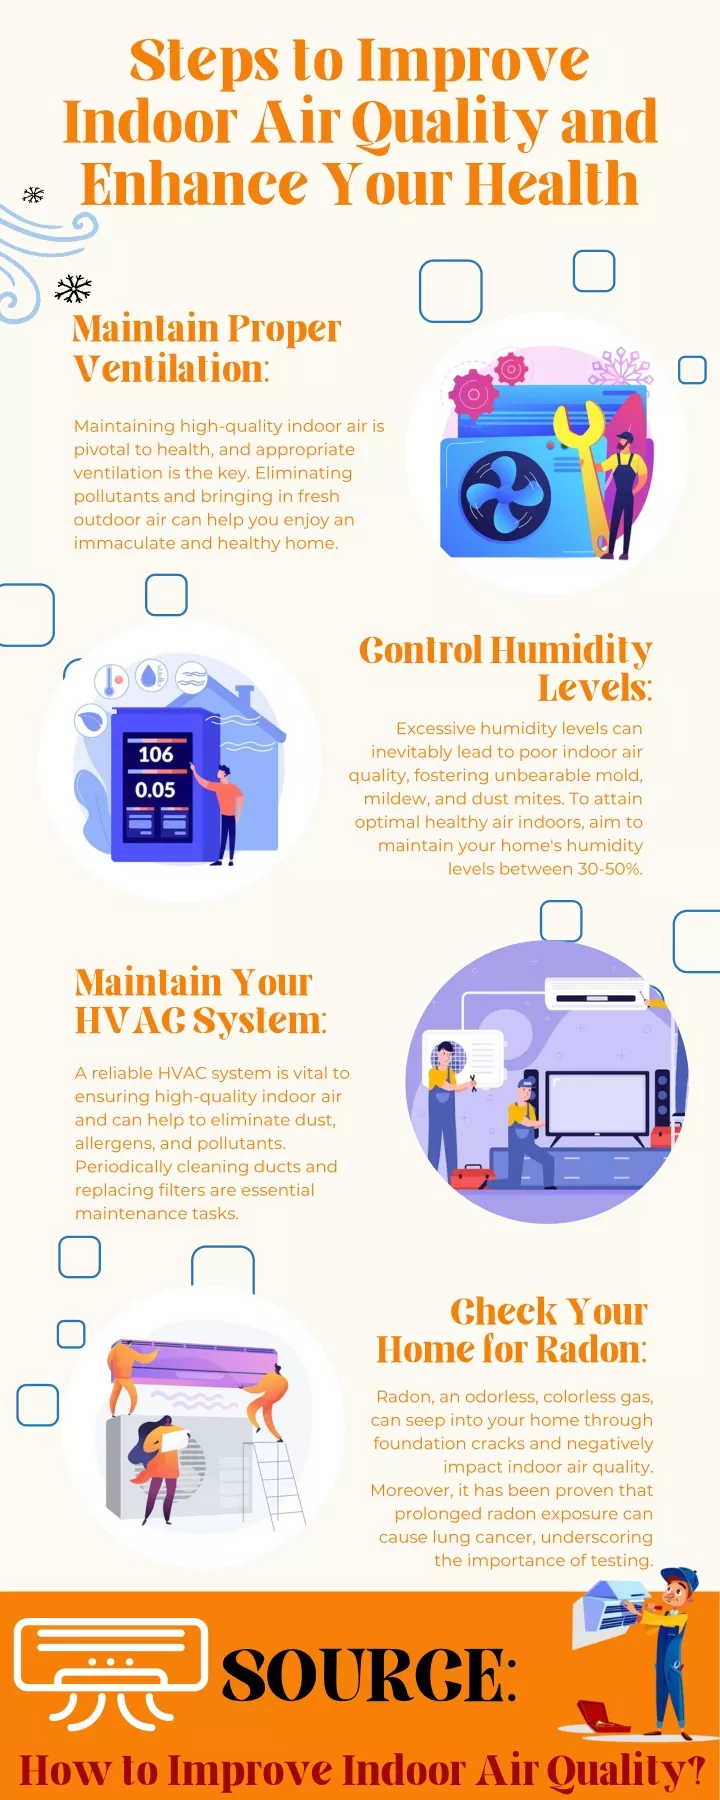 steps to improve indoor air quality and enhance